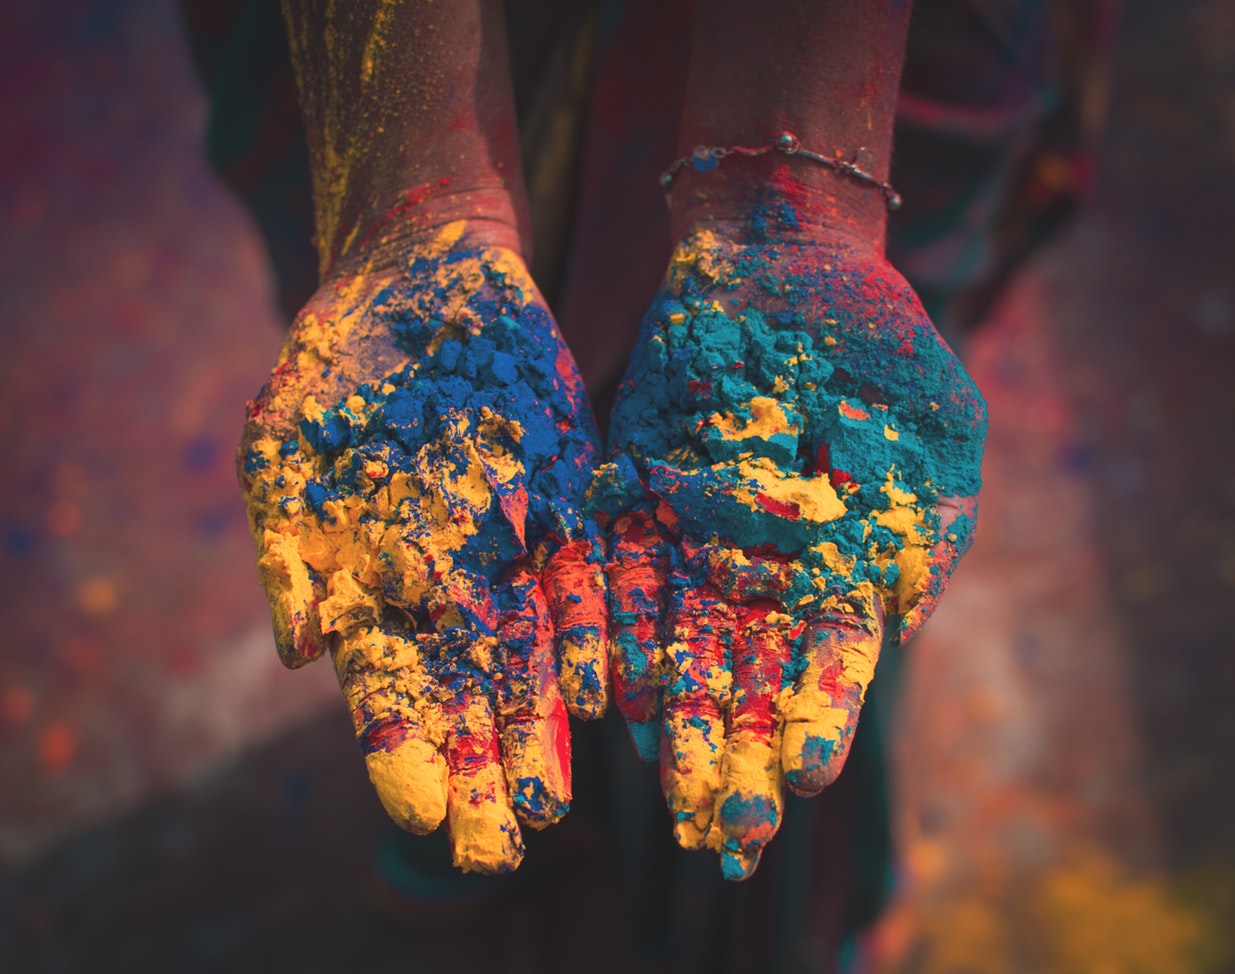 PHOTO: A woman celebrating Holy holds her colorful hands together in thanks. There are gobs of yellow, red, blue and green paint covering the palms of her hands. She is wearing a small bracelet on her left wrist. Photo courtesy of Debashis Biswas